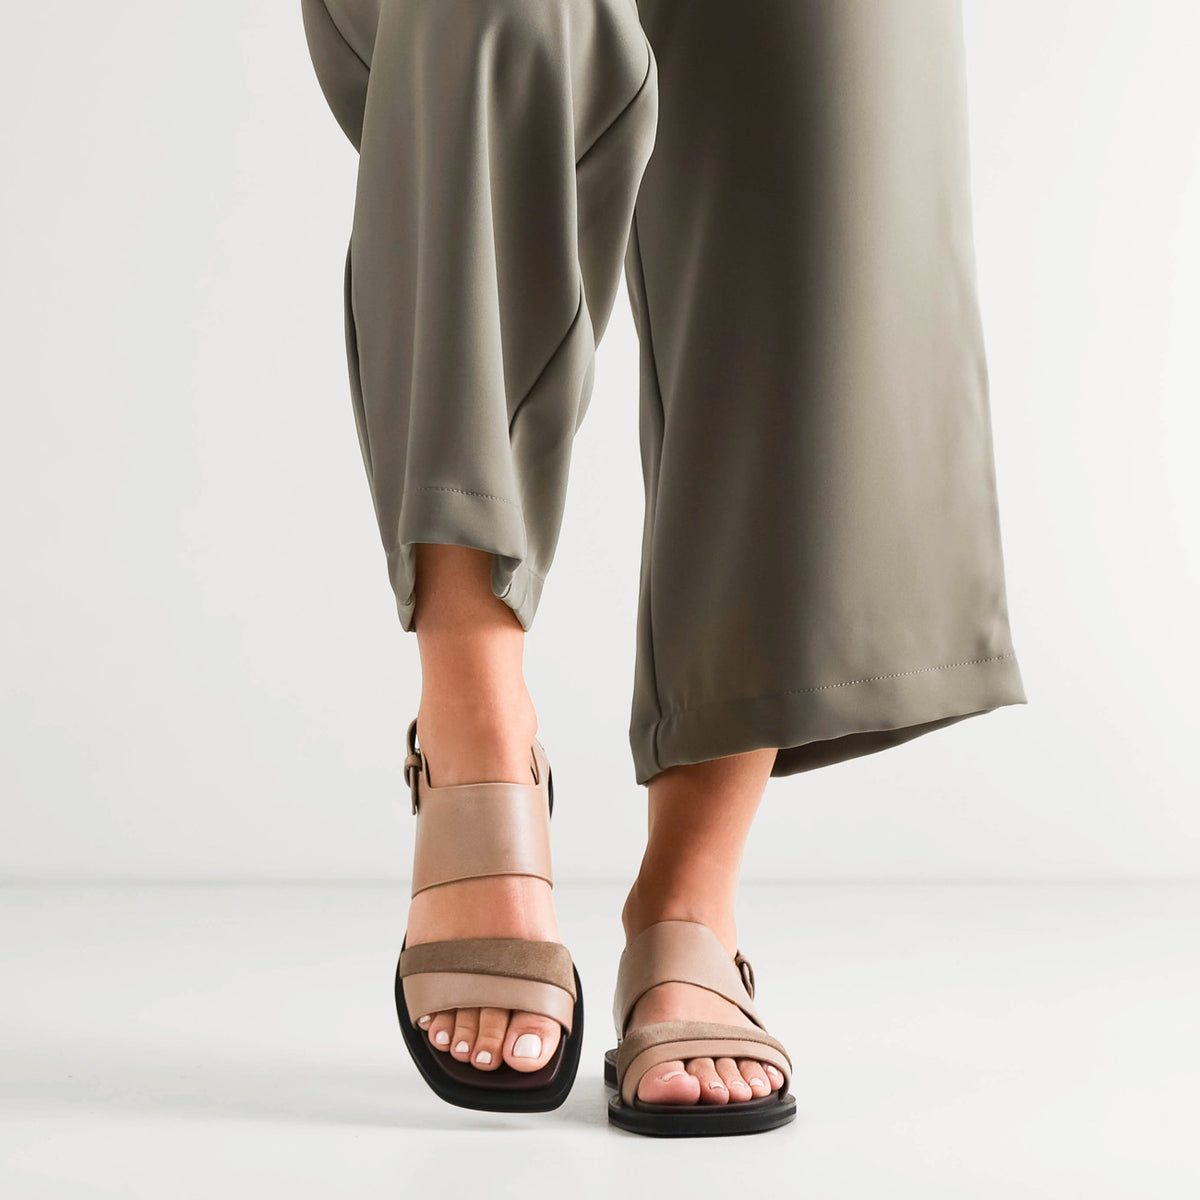 EOS, Monsoon, Sandal, Leather, Taupe